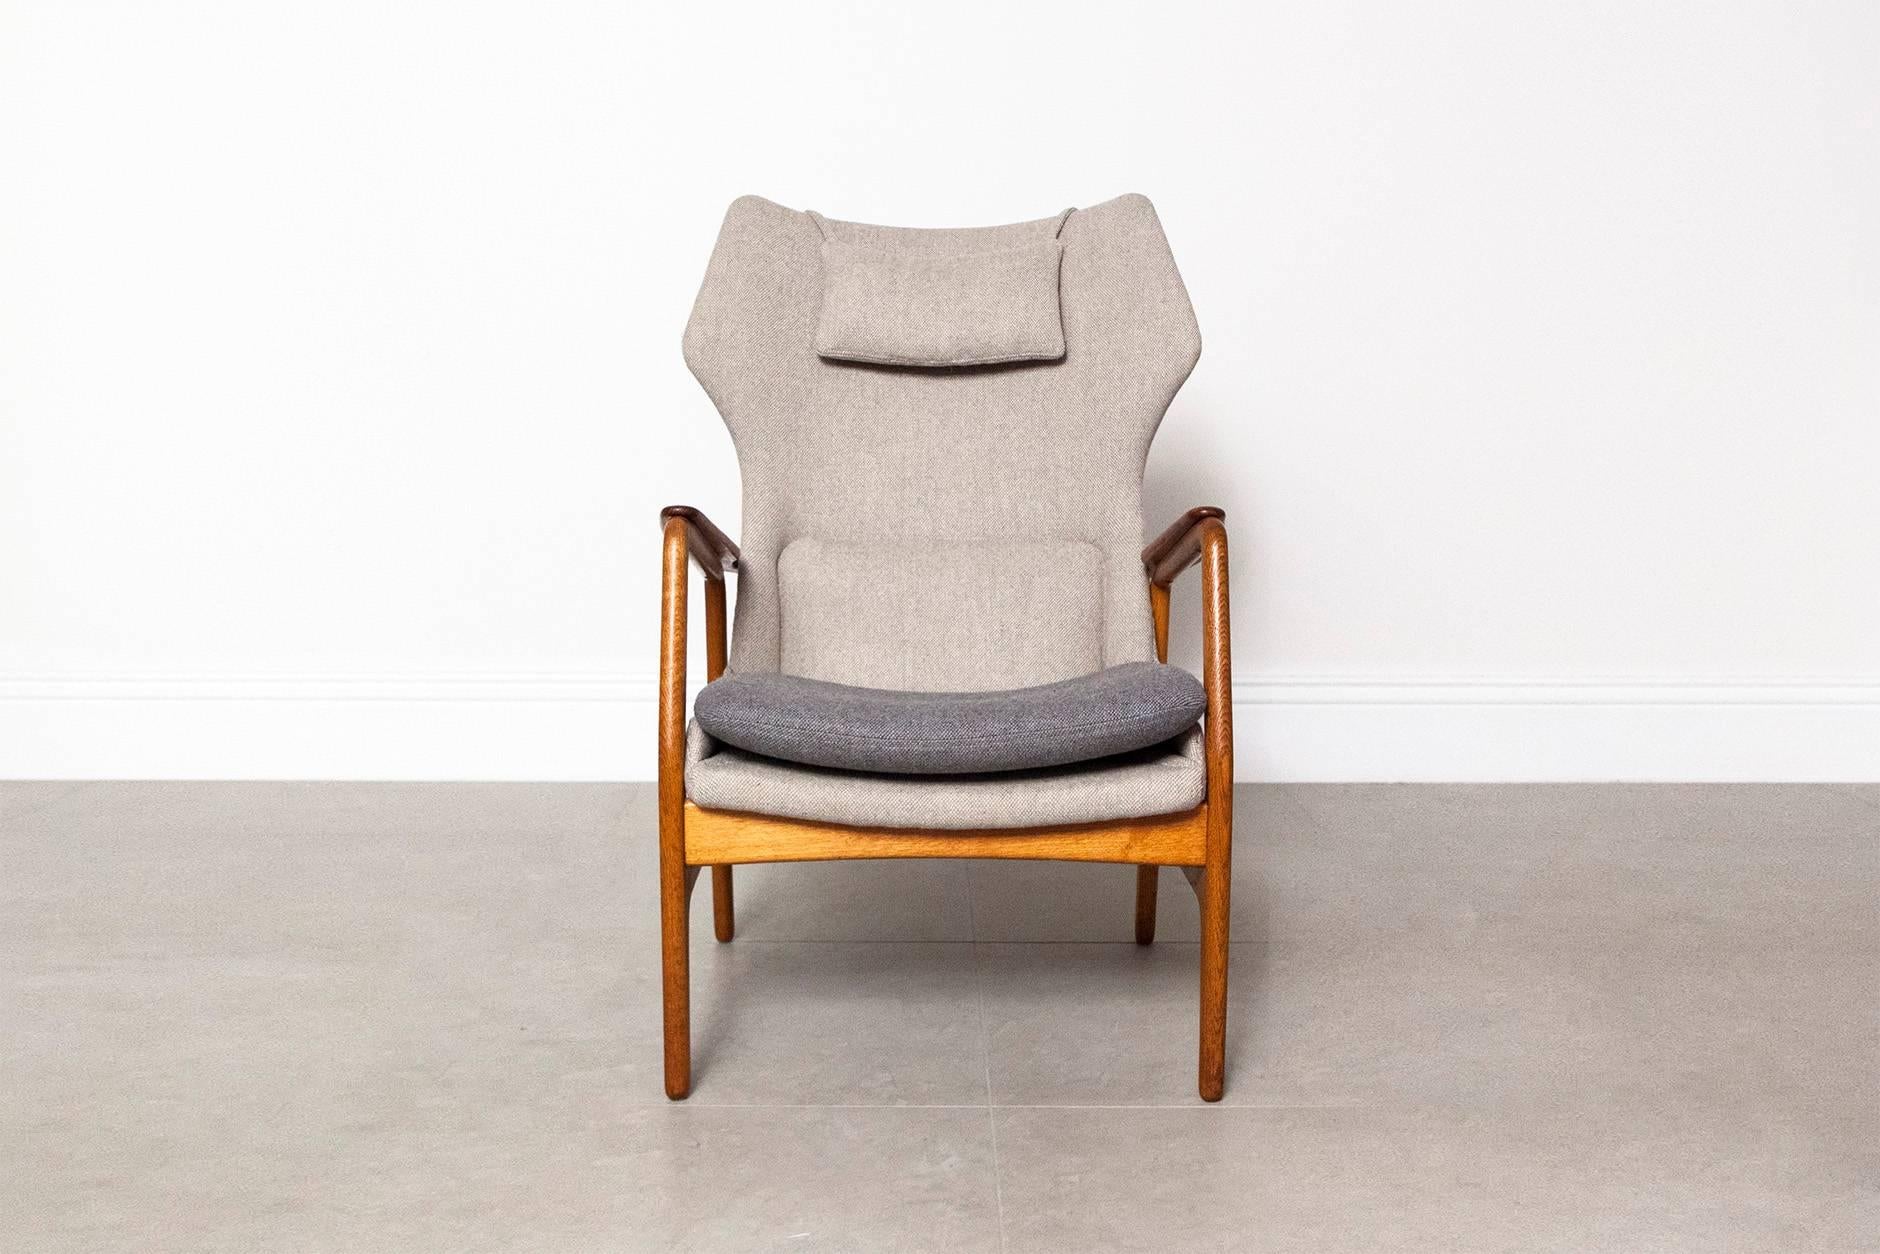 Danish designed wing back chair for Dutch manufacturer Bovenkamp, circa 1960, courtesy of Aksel Bender Madsen. The elegantly curved teak armrest sits on top of a golden oak frame  and has been reupholstered in Bute grey tweed with contrasting seat